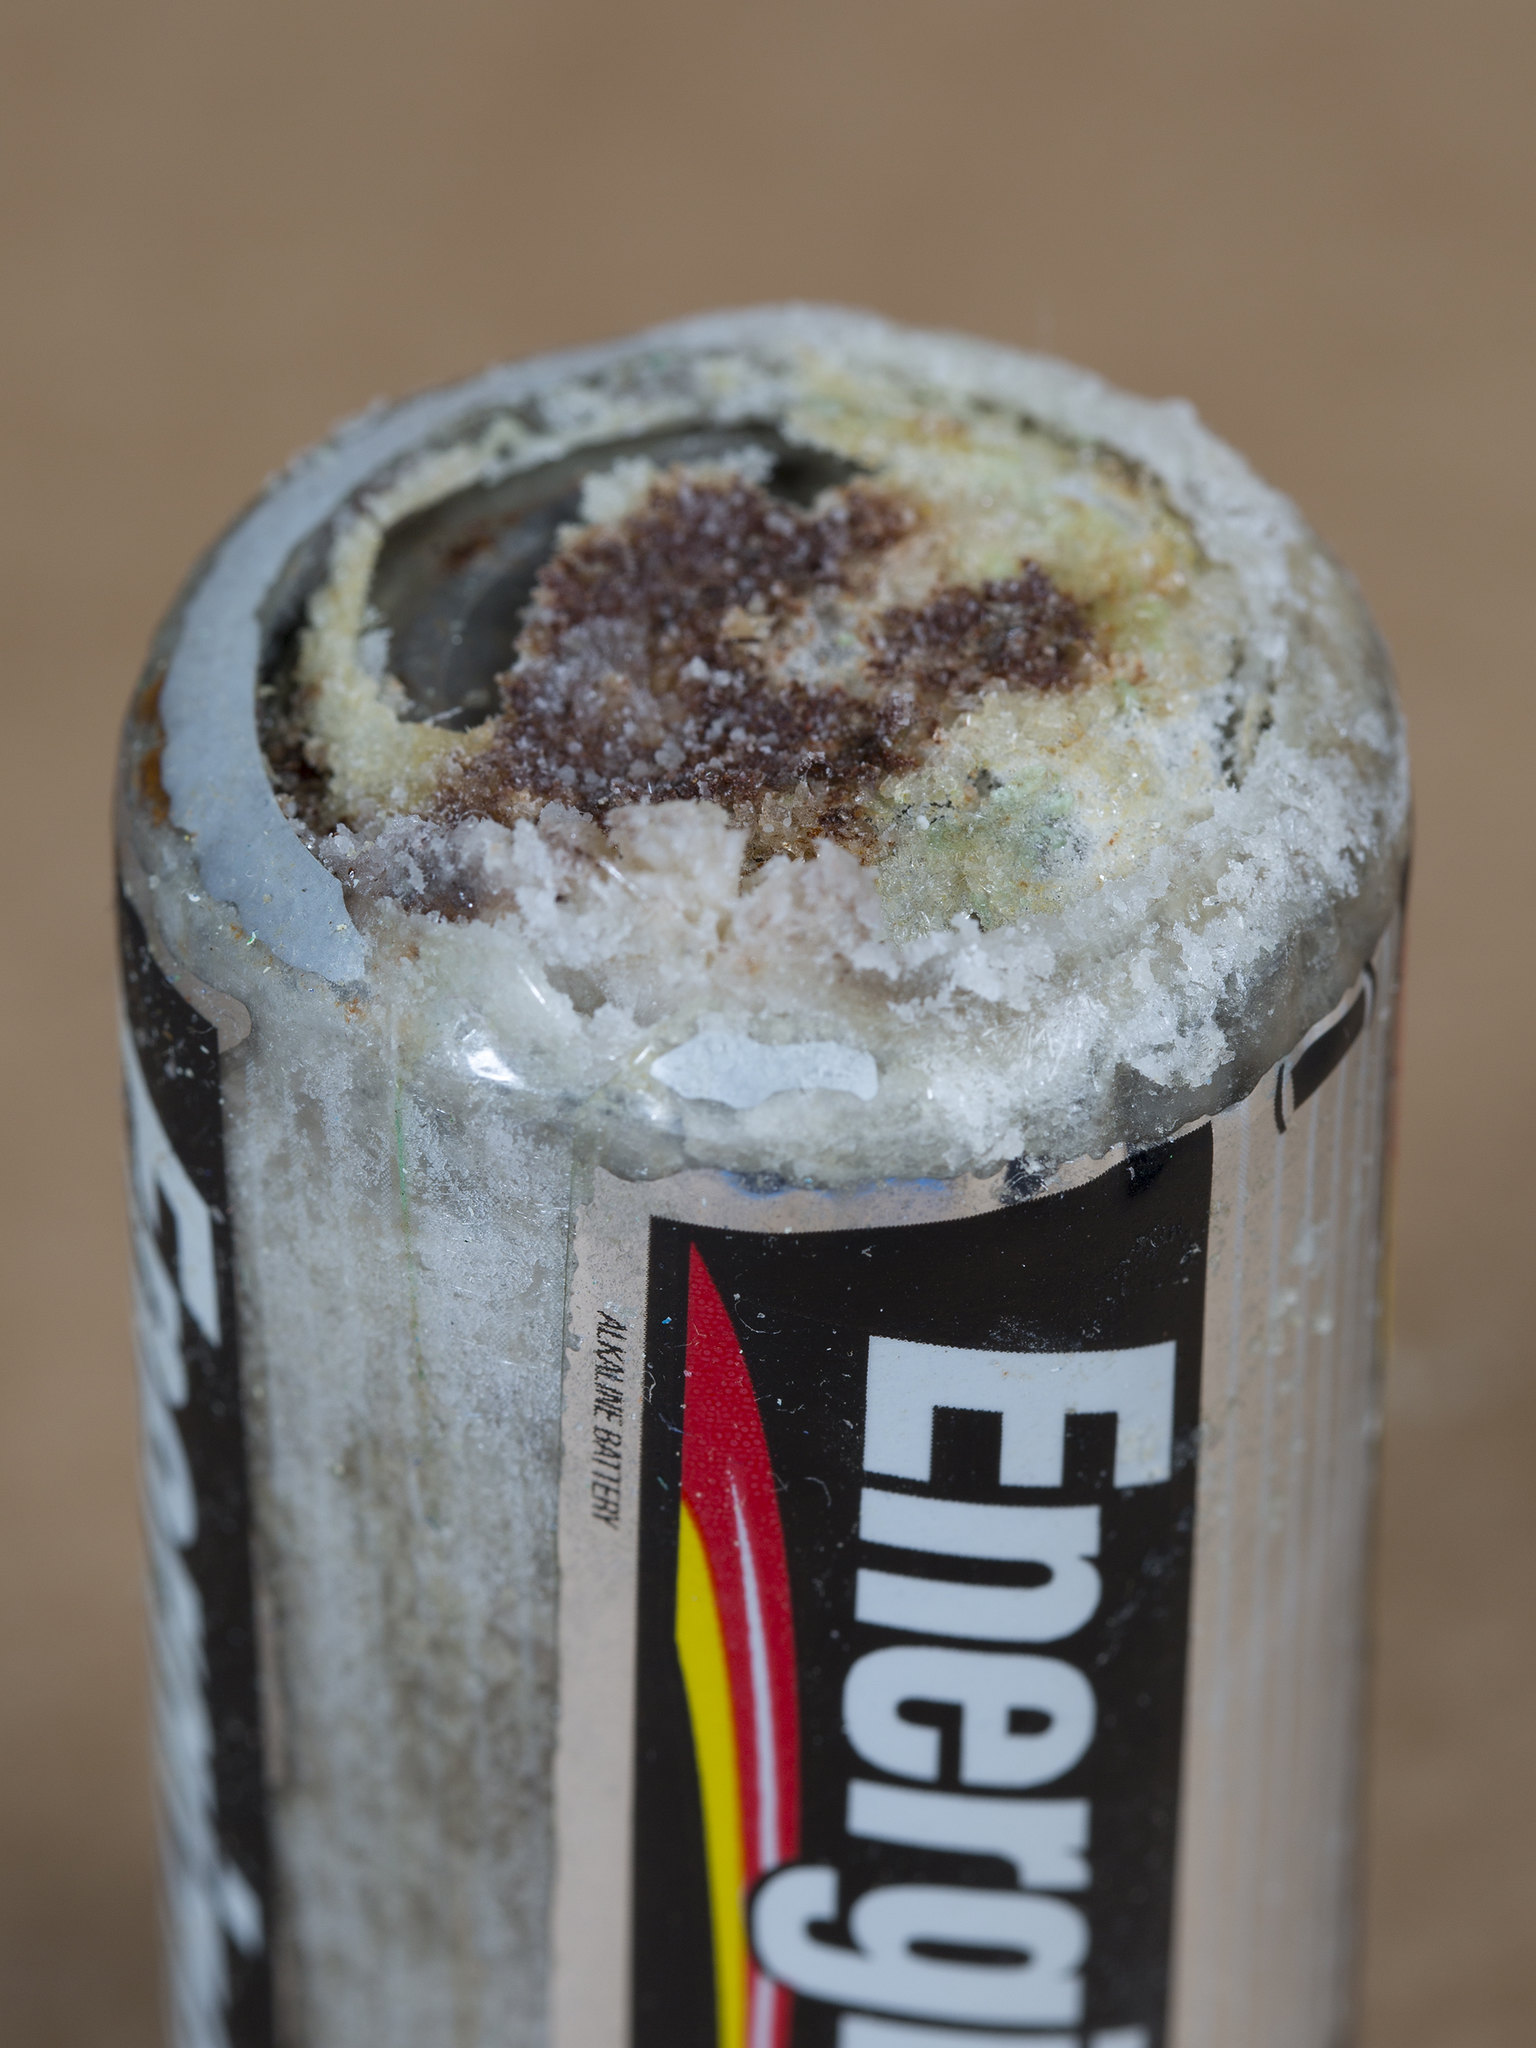 Image shows the end of a battery which has leaked its acidic contents. The leak looks like a thick crust of a whitish substance.